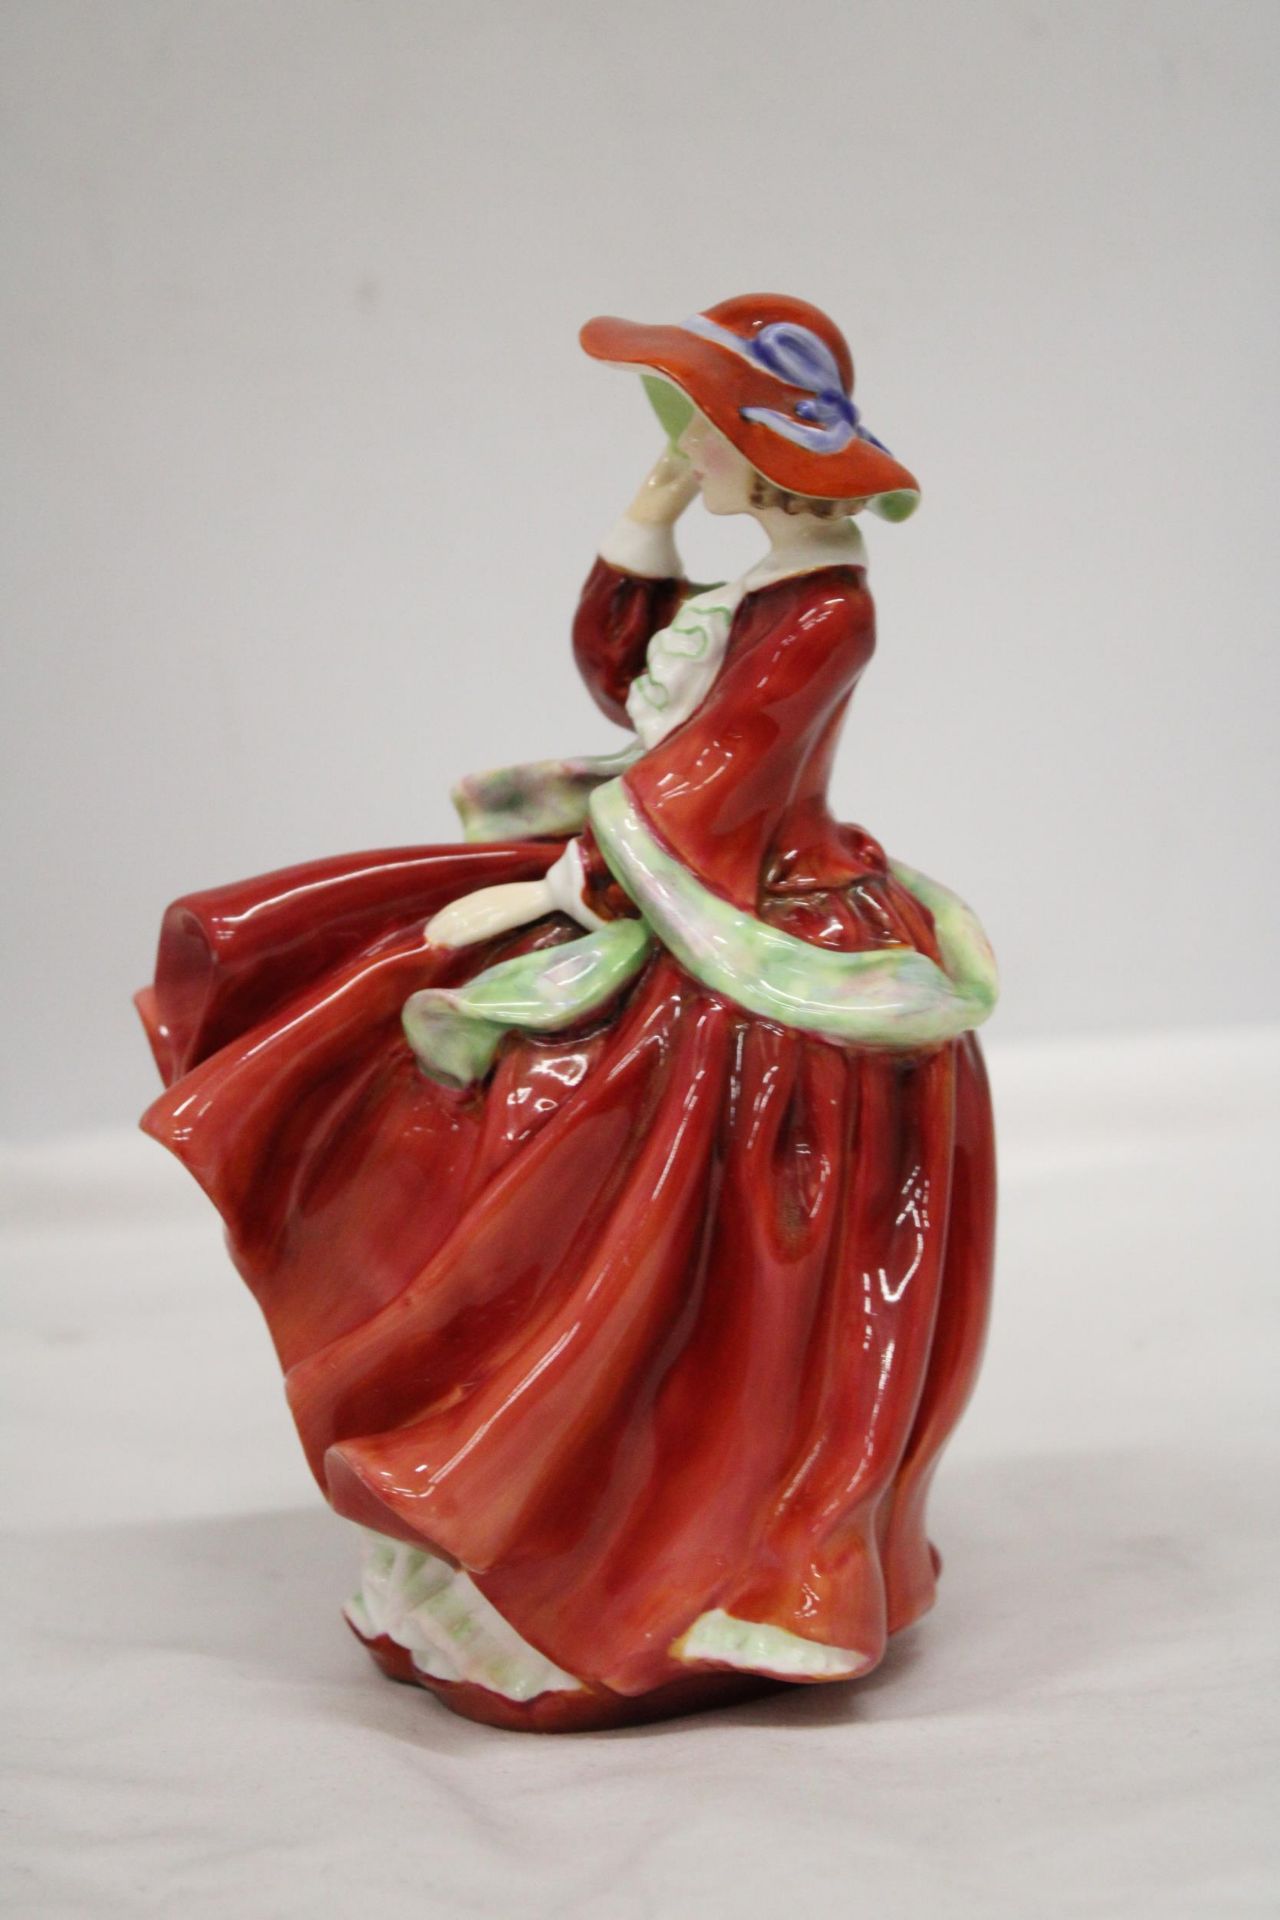 A ROYAL DOULTON FIGURE "TOP OF THE HILL" HN 1834 - Image 2 of 6